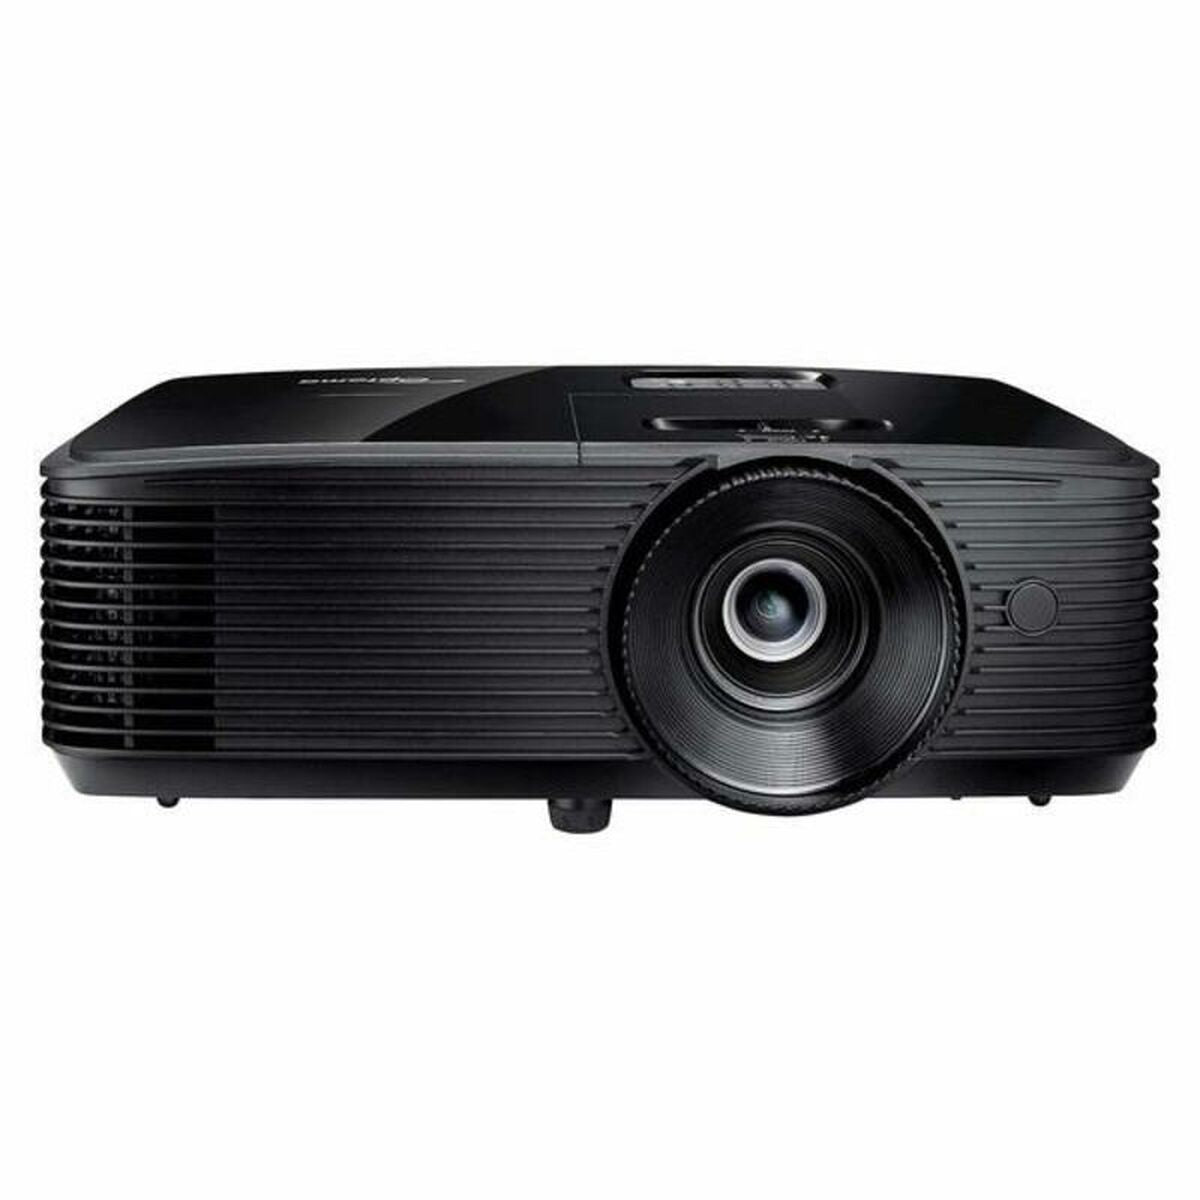 Projector Optoma E9PX7D701EZ1 WXGA 4000 Lm, Optoma, Electronics, TV, Video and home cinema, projector-optoma-e9px7d701ez1-wxga-4000-lm-1, Brand_Optoma, category-reference-2609, category-reference-2642, category-reference-2947, category-reference-t-18805, category-reference-t-18811, category-reference-t-19653, cinema and television, computers / peripherals, Condition_NEW, entertainment, office, Price_500 - 600, RiotNook